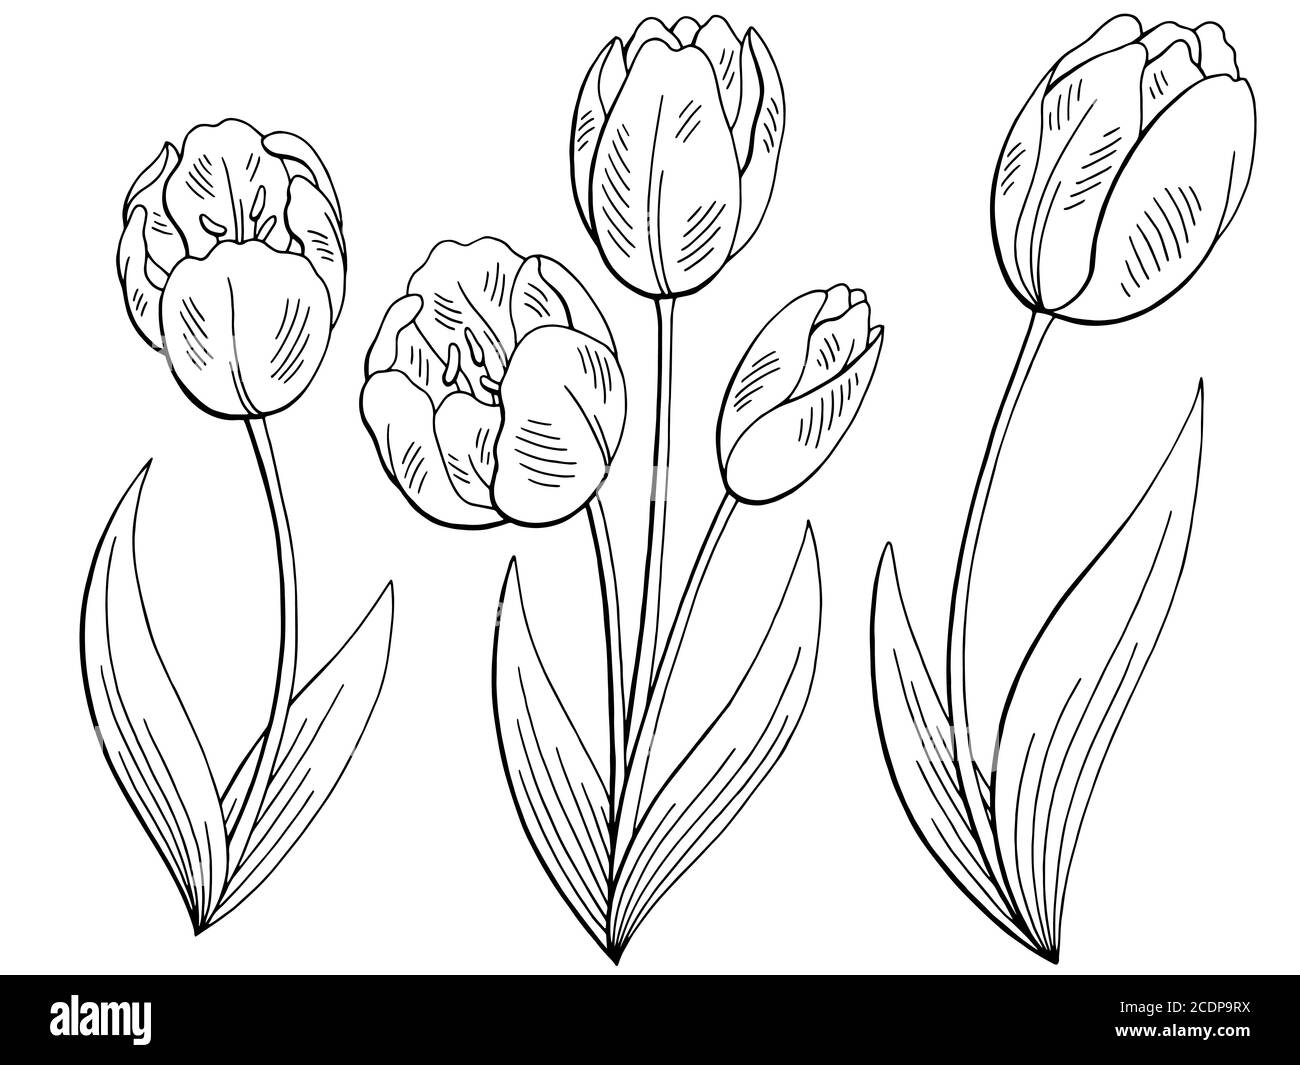 Buy Sale Art, Tulips Pen Sketch, Tulip Flower, Original Pen Sketch, Flower  Drawing, Tulips Picture, Black and White, Wall Flower Decor Online in India  - Etsy